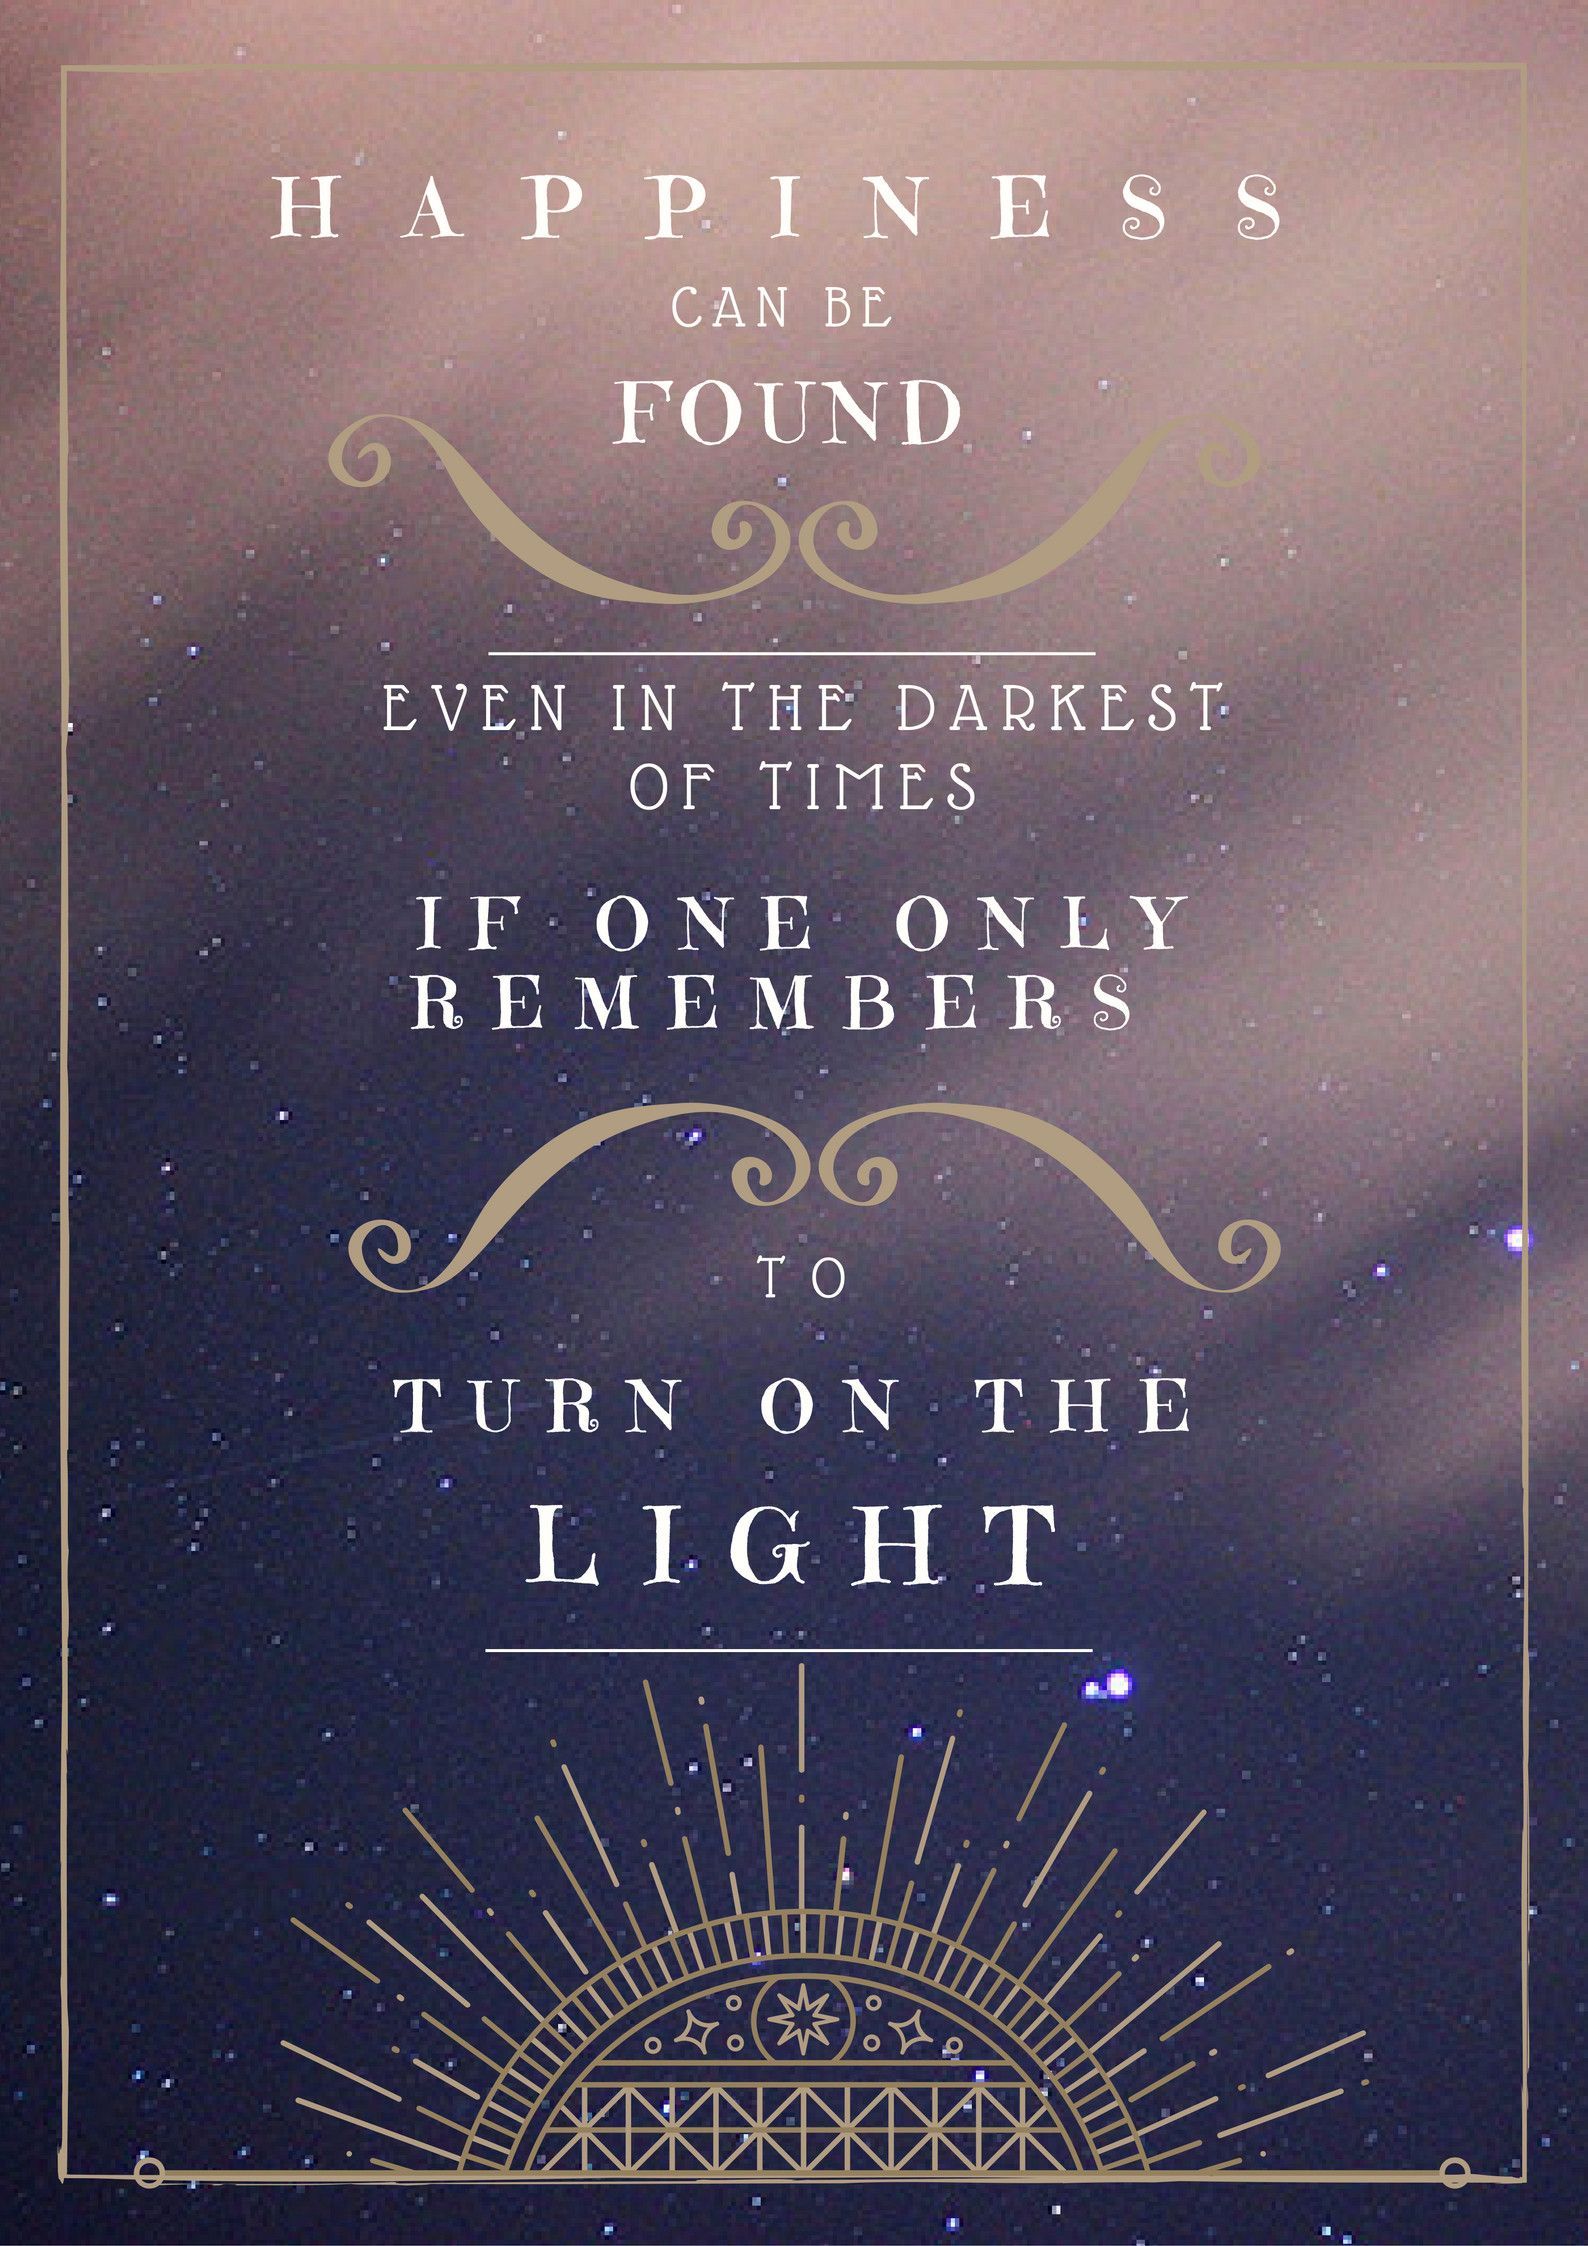 Harry Potter Quotes Wallpaper Free Harry Potter Quotes